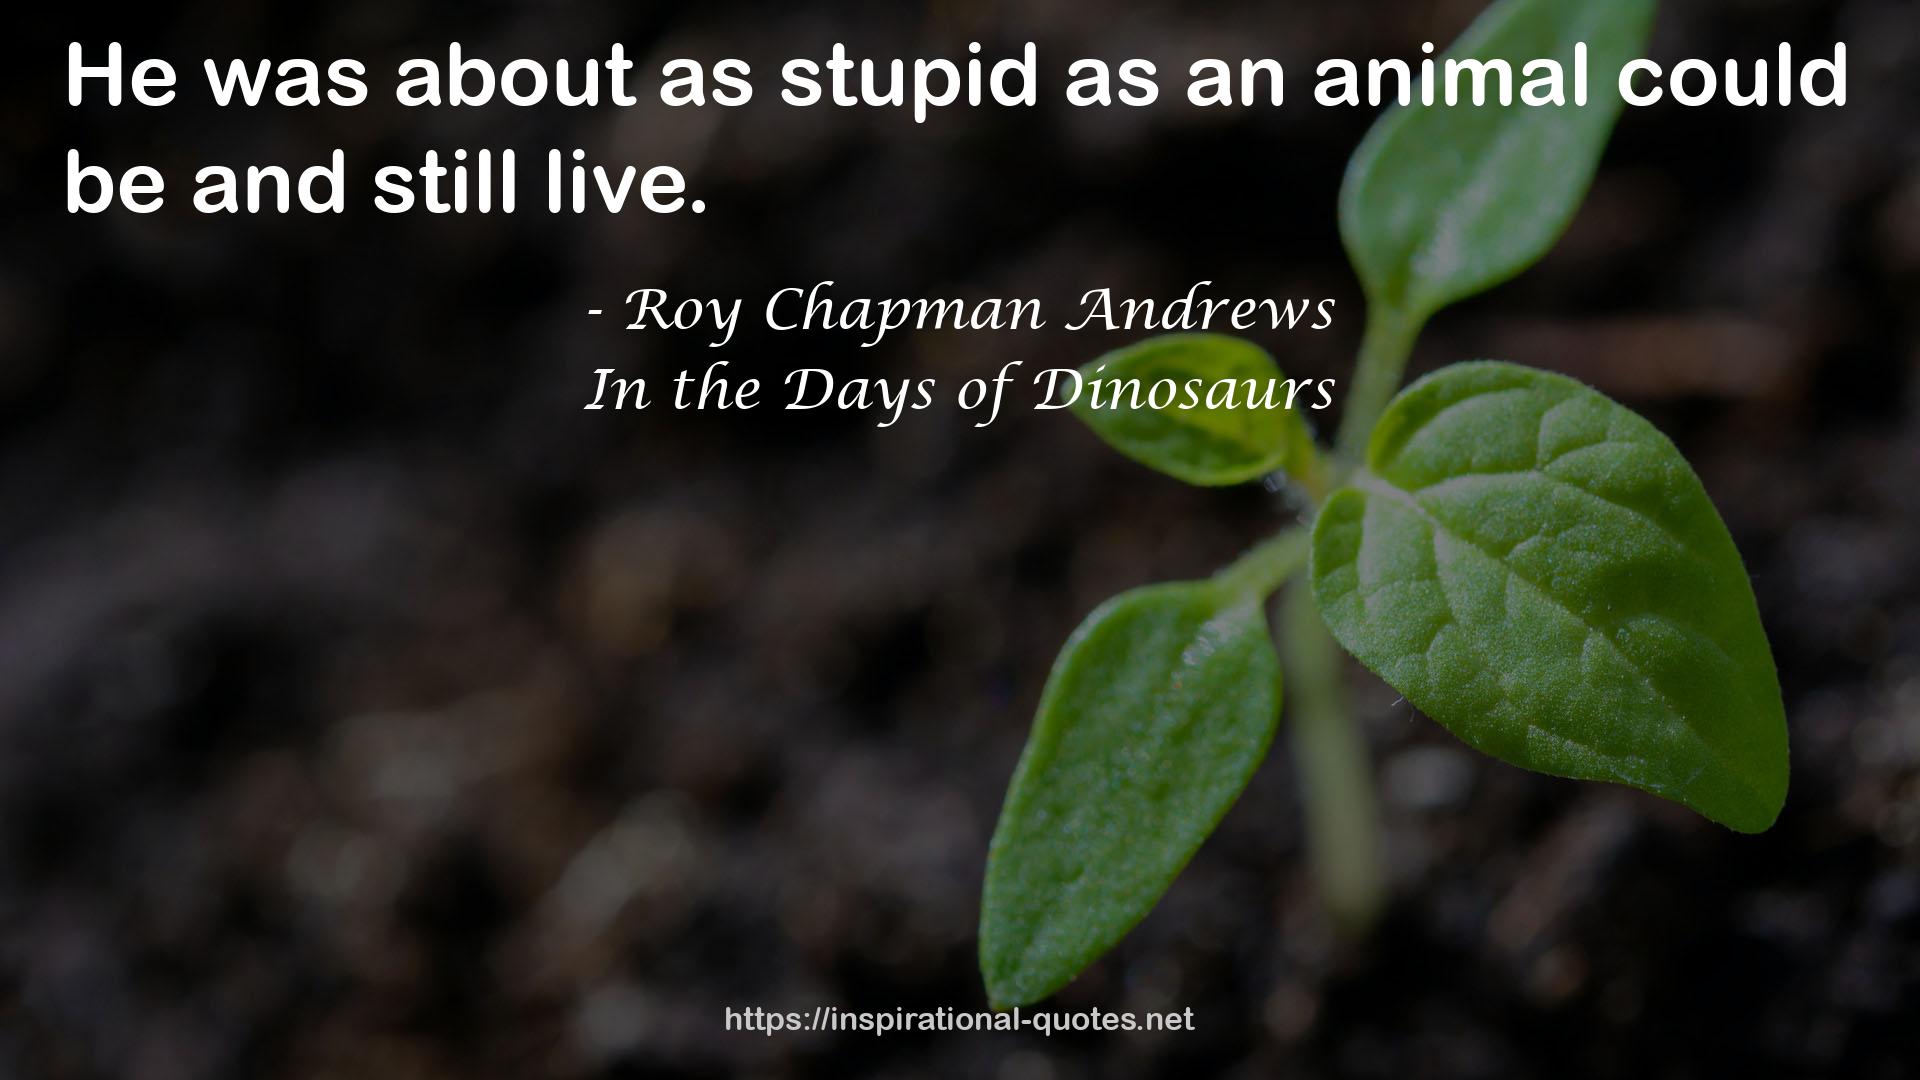 In the Days of Dinosaurs QUOTES